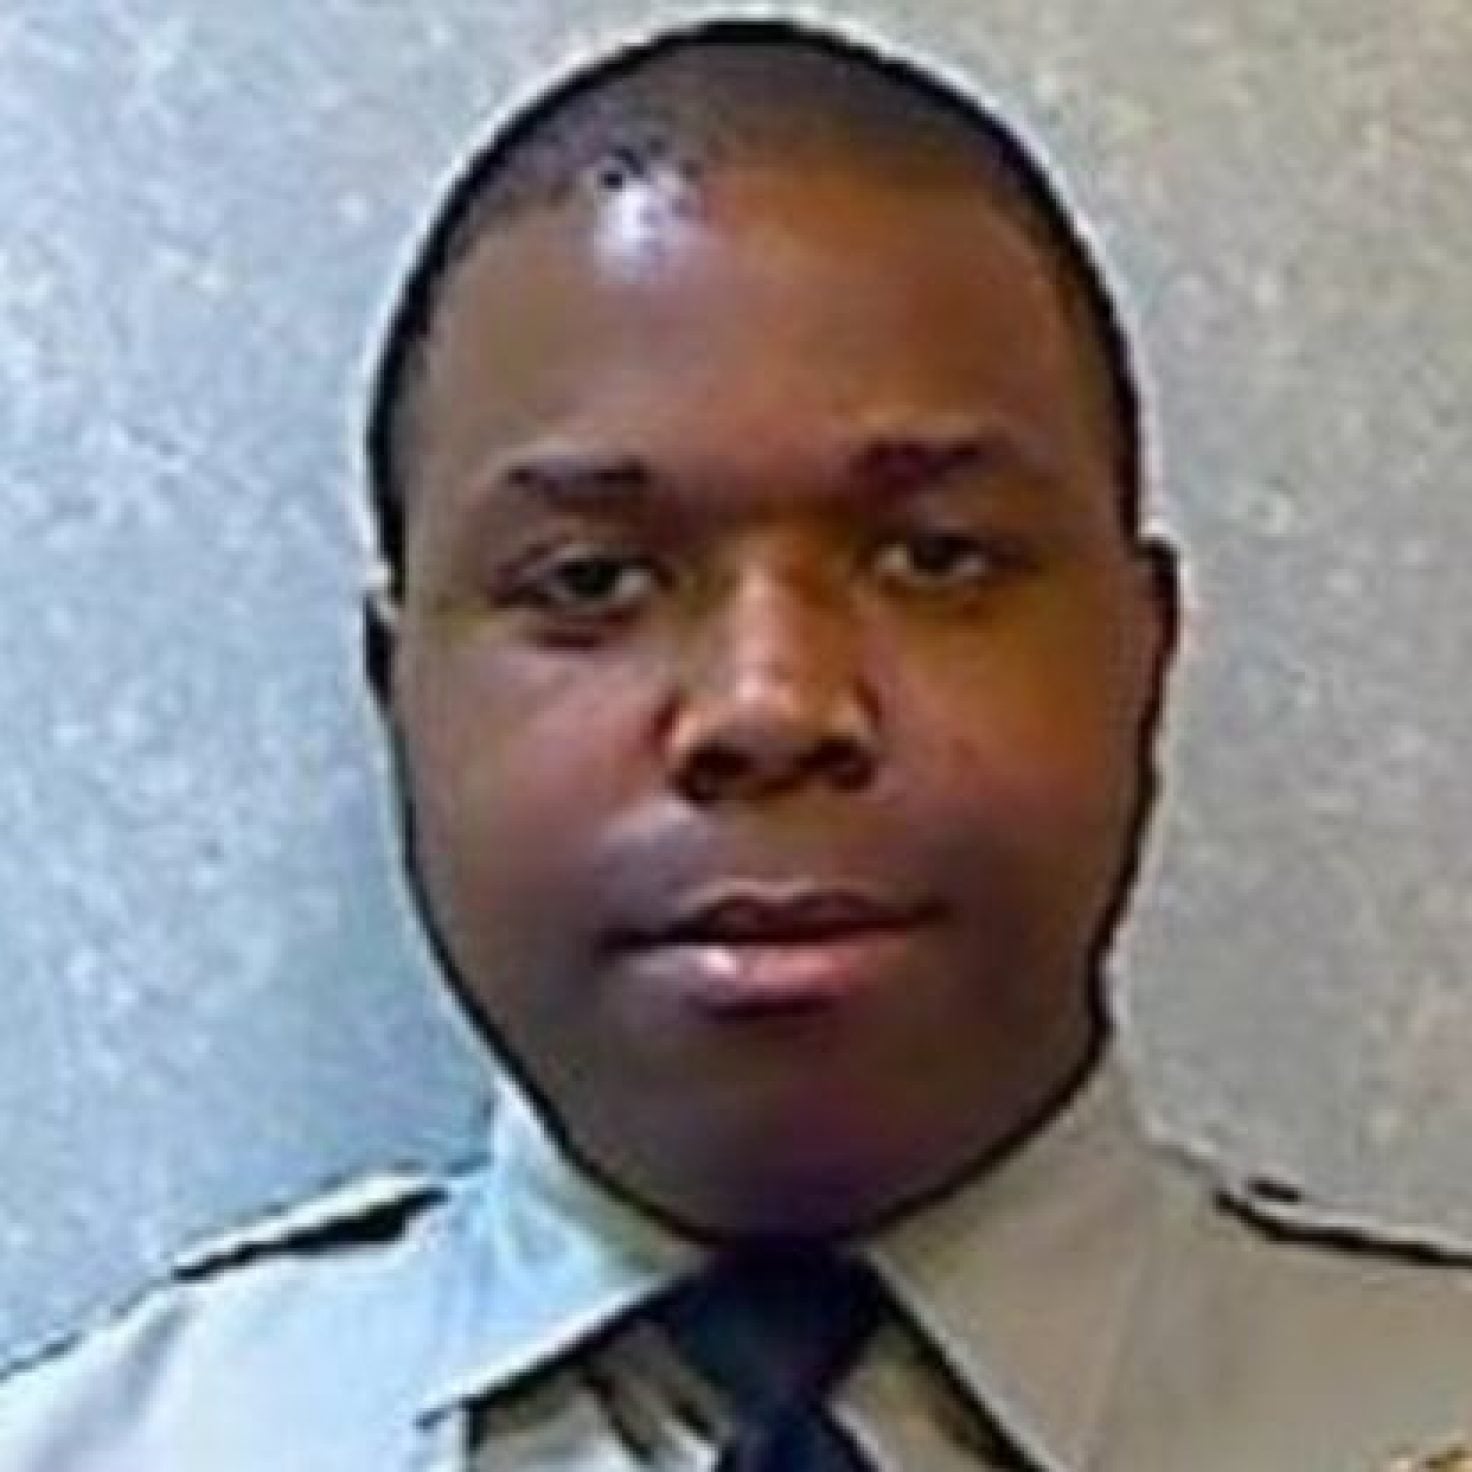 Maryland Officer Charged With Murder After Shooting Handcuffed Suspect